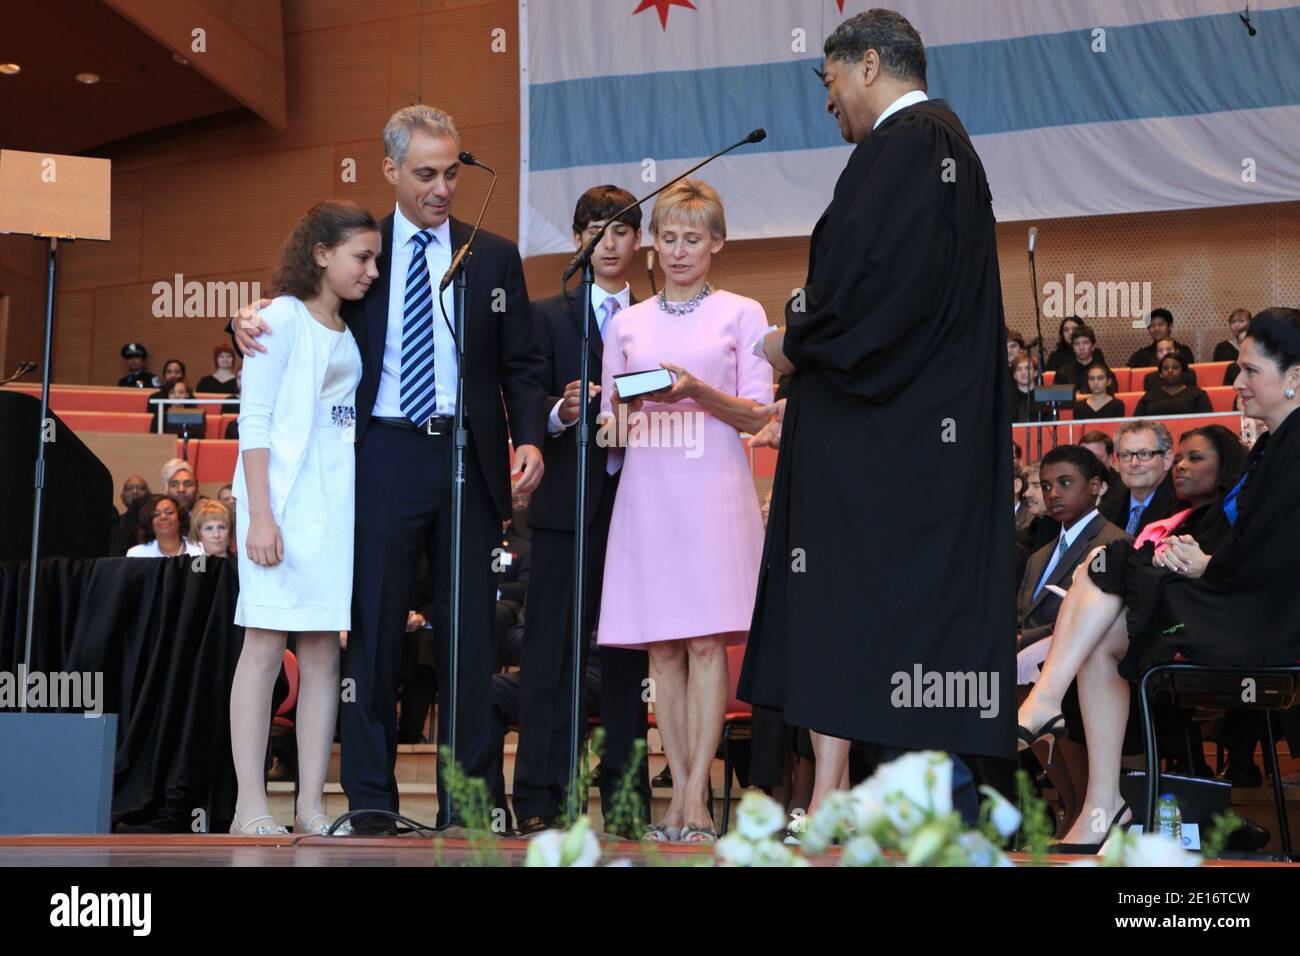 Mayor-elect Rahm Emanuel, wife Amy Rule Emanuel and children on the stage for a swearing-in ceremony at Millenium Park in Chicago, Illinois on May 16, 2011. Photo by Alexandra Buxbaum/ABACAPRESS.COM Stock Photo